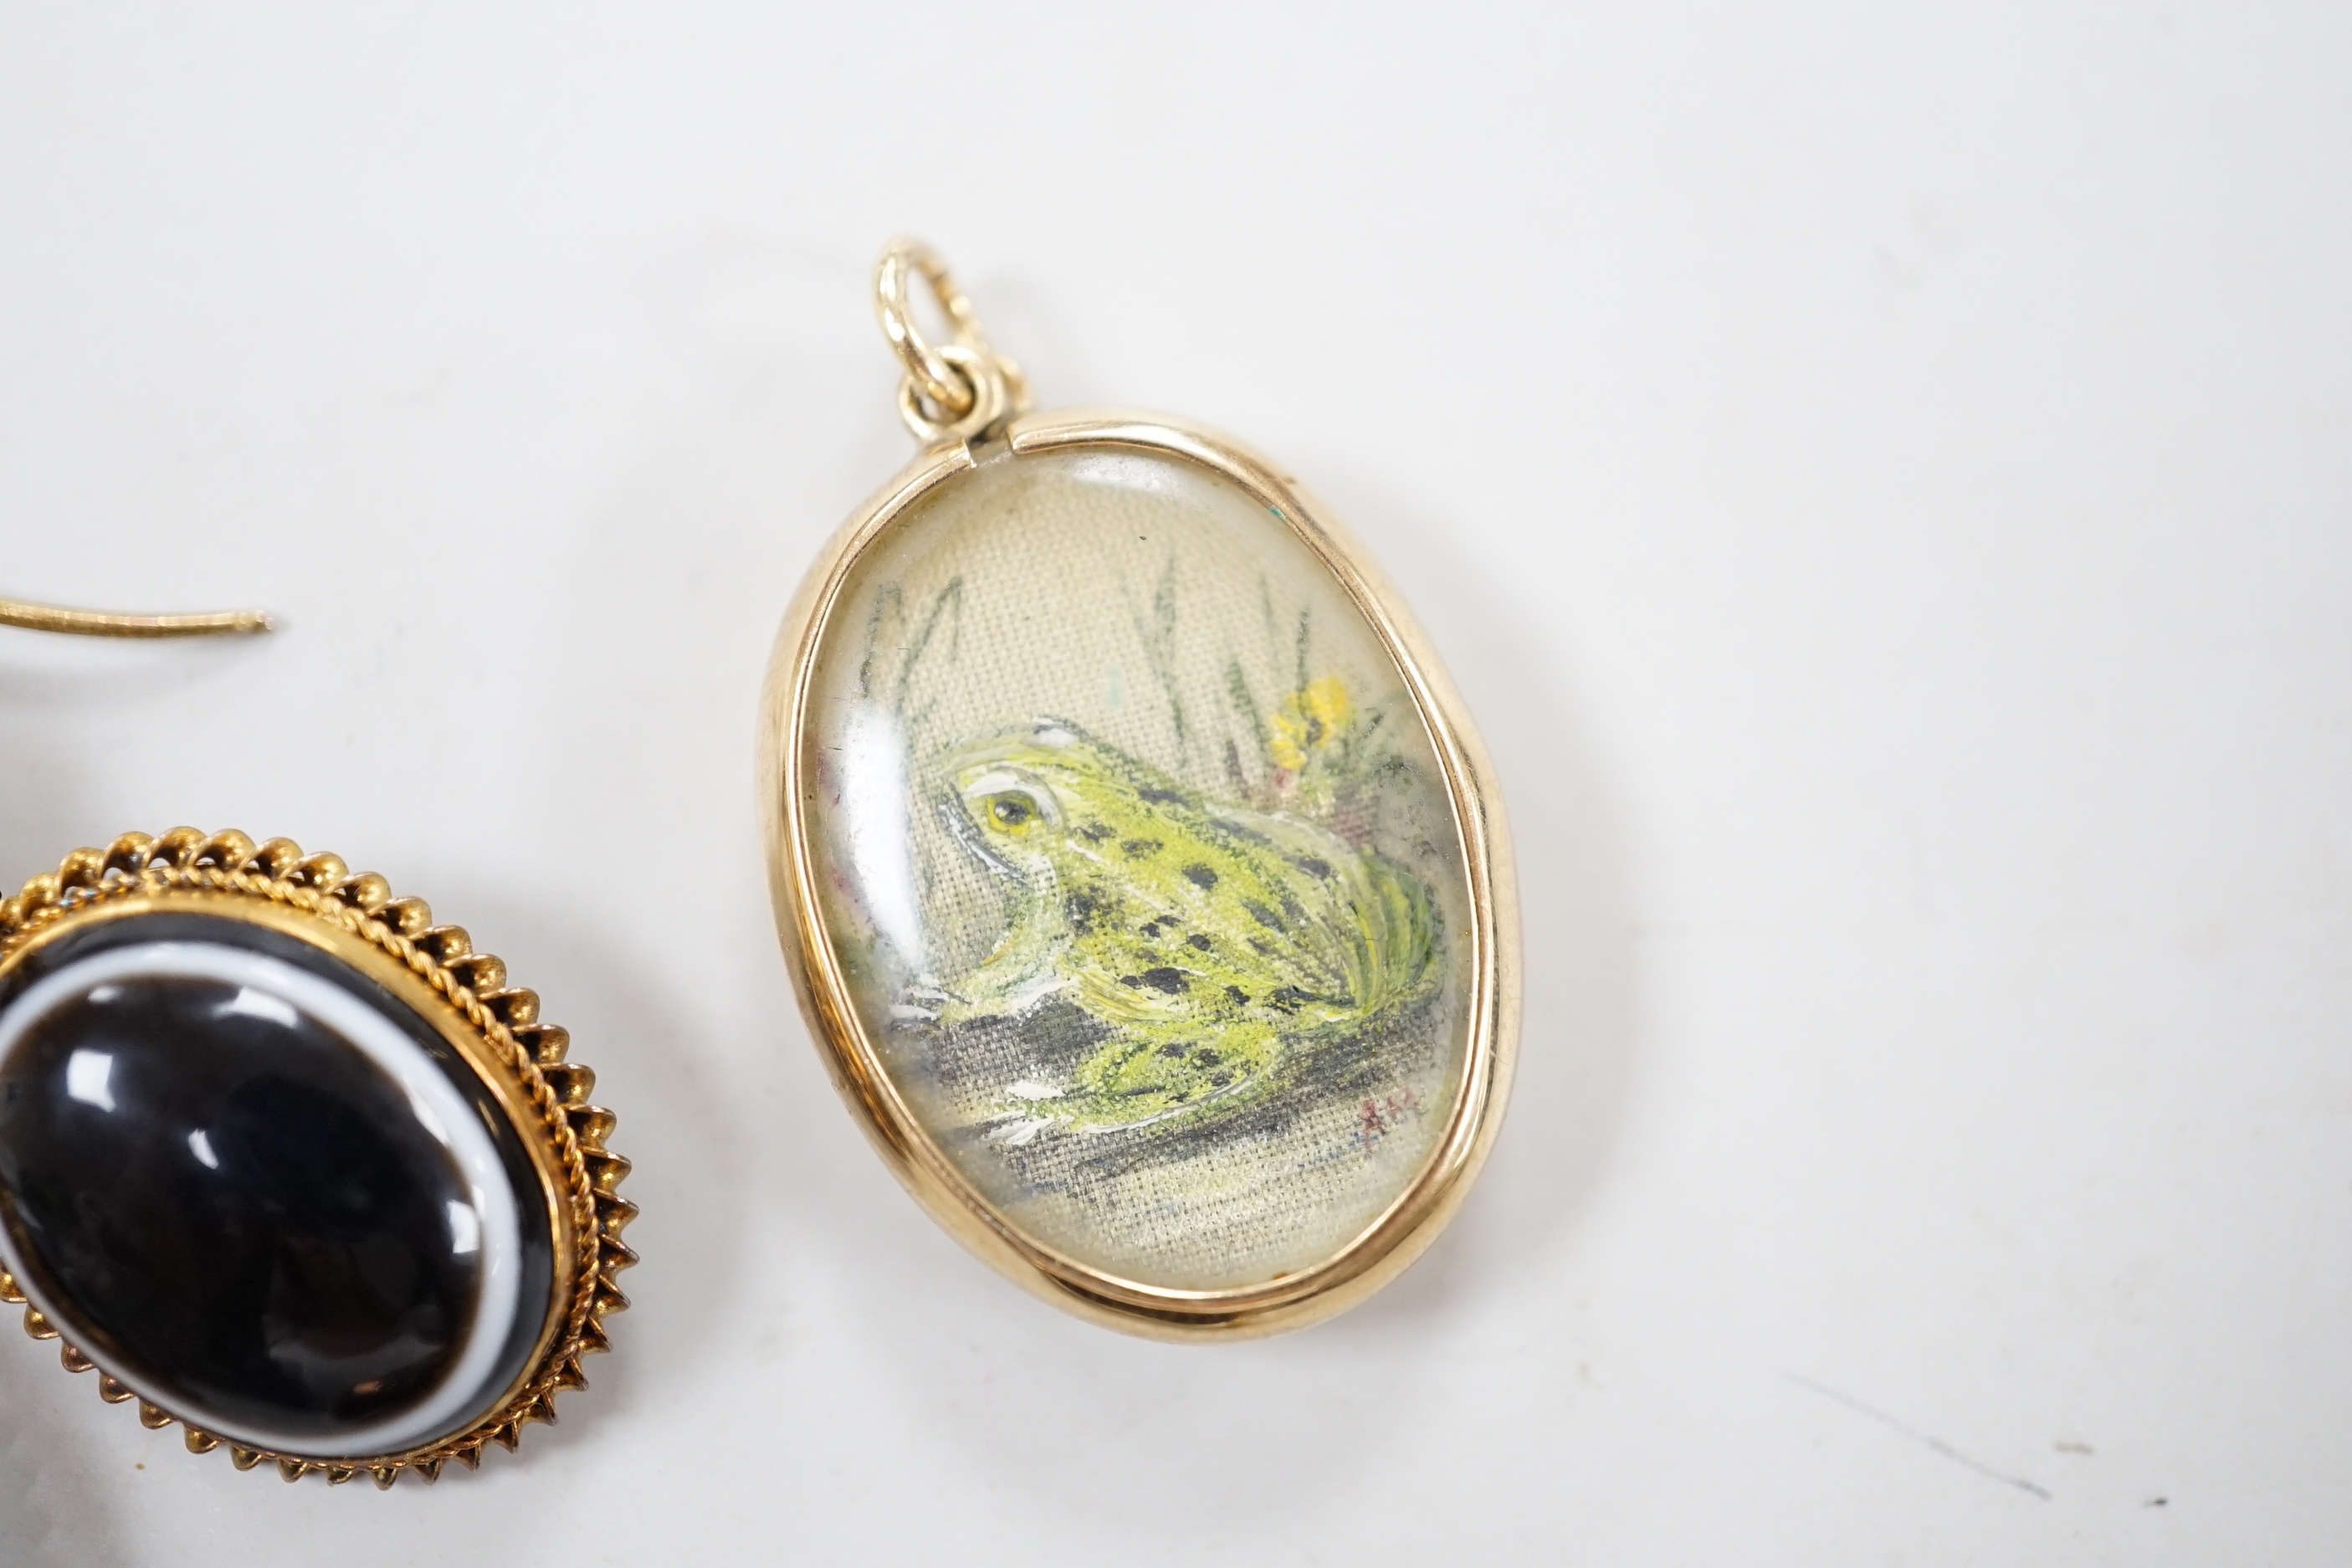 A pair of Victorian yellow metal and banded agate set drop earrings, overall 41mm, a similar brooch and a modern 9ct gold mounted oval pendant, containing a picture of a frog.